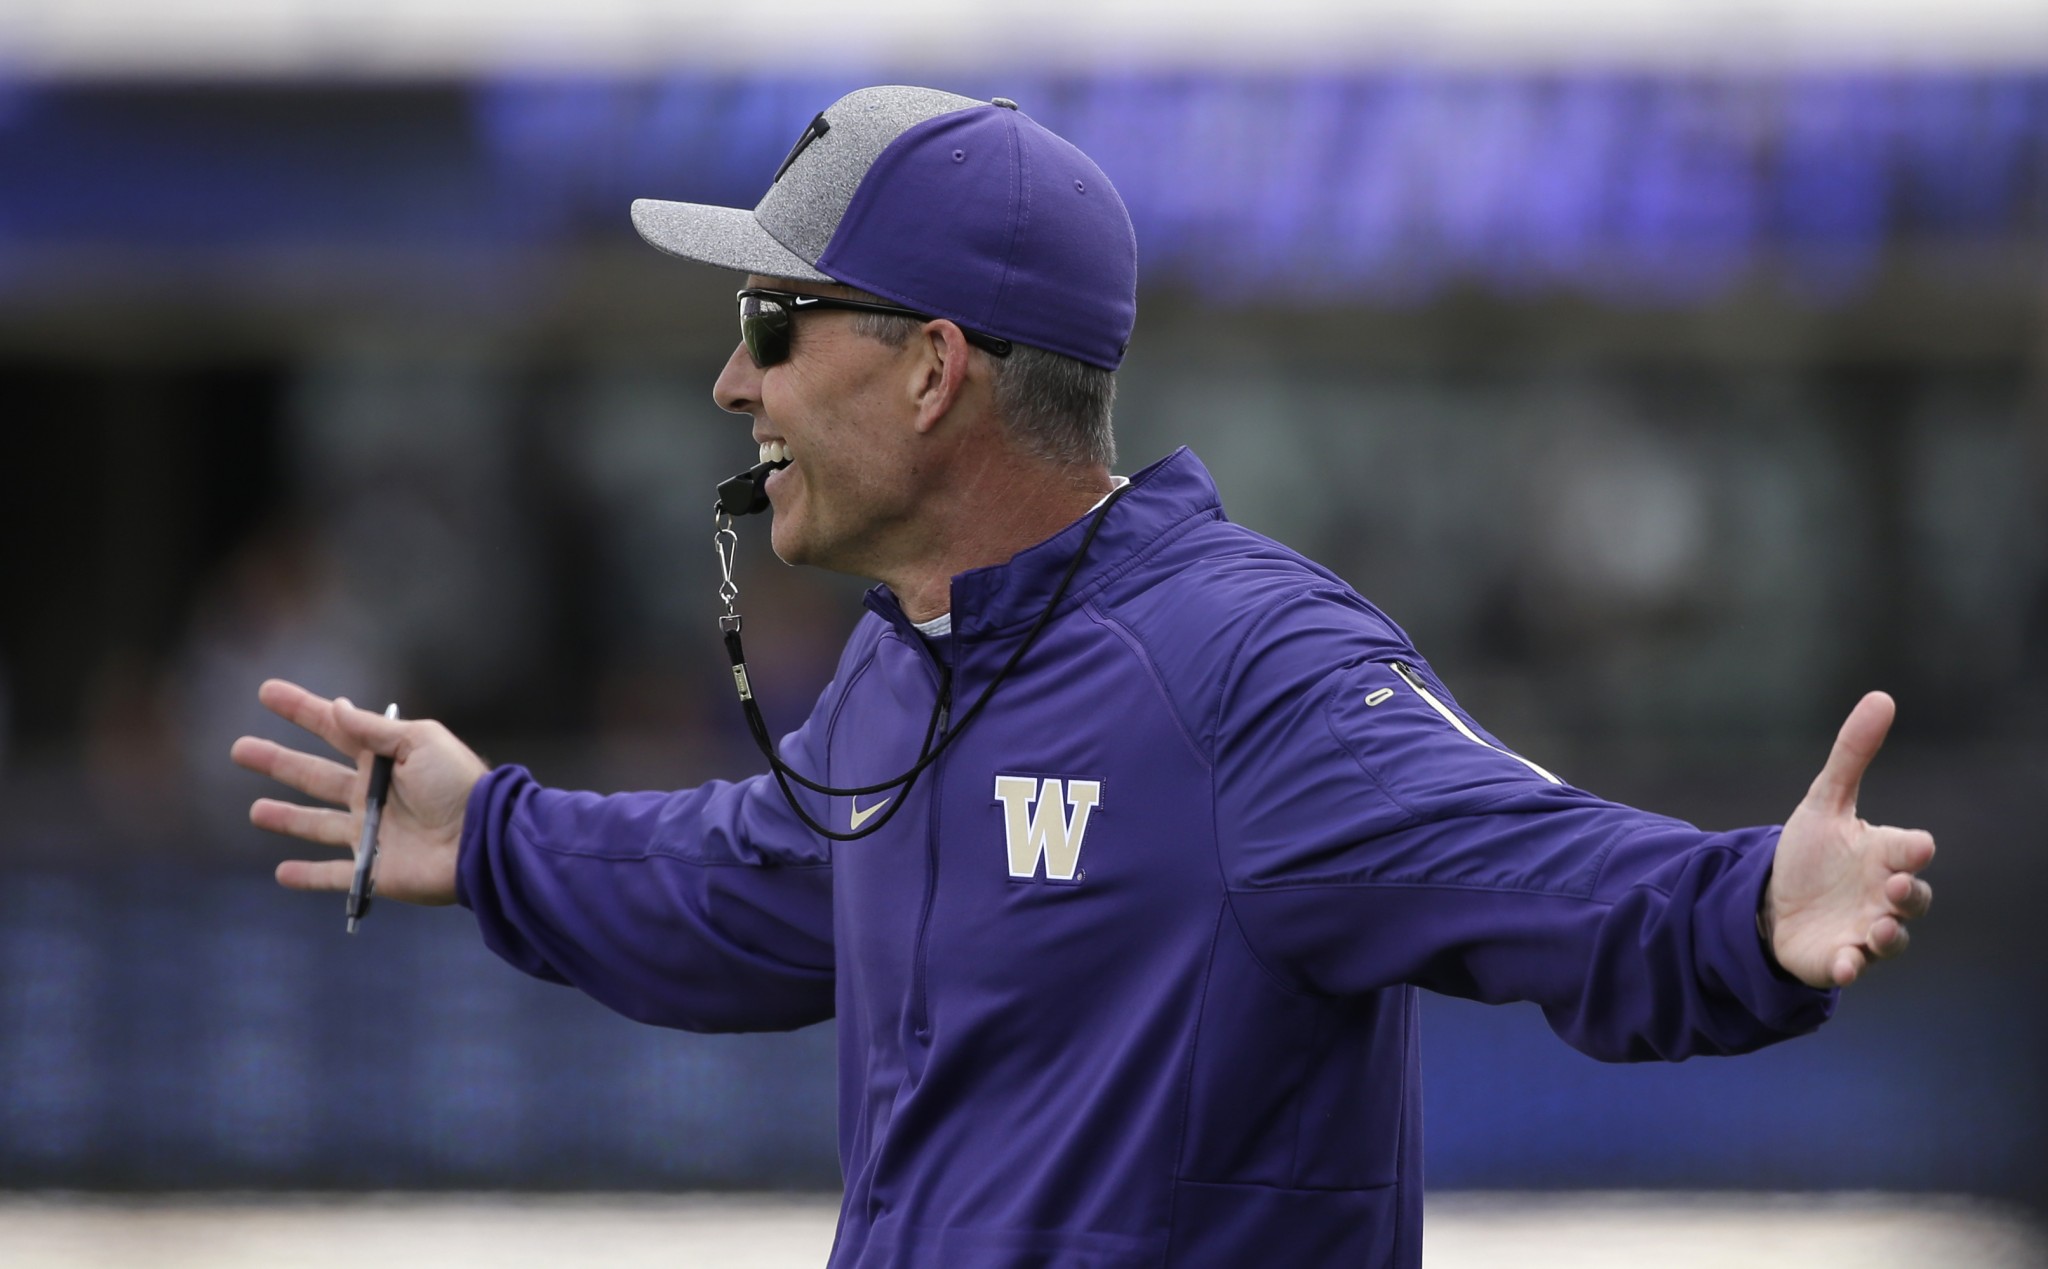 Washington head coach Chris Petersen in action at the team's annual spring preview football event Saturday, April 23, 2016, in Seattle. (AP Photo/Elaine Thompson)